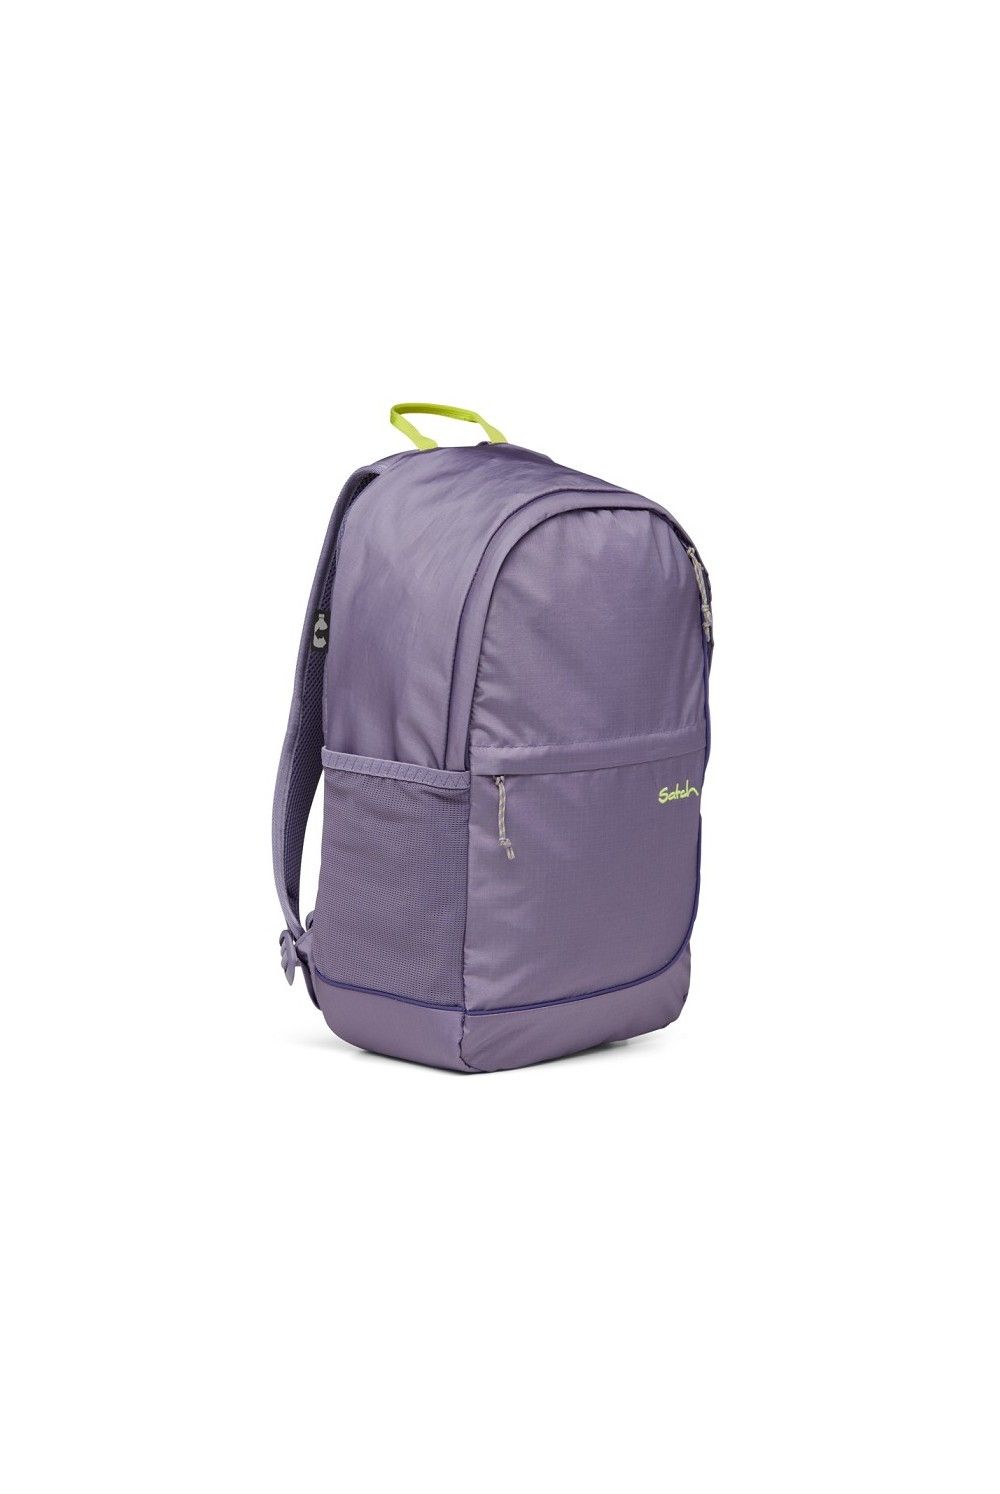 Satch Fly Rucksack Ripstop Lilac